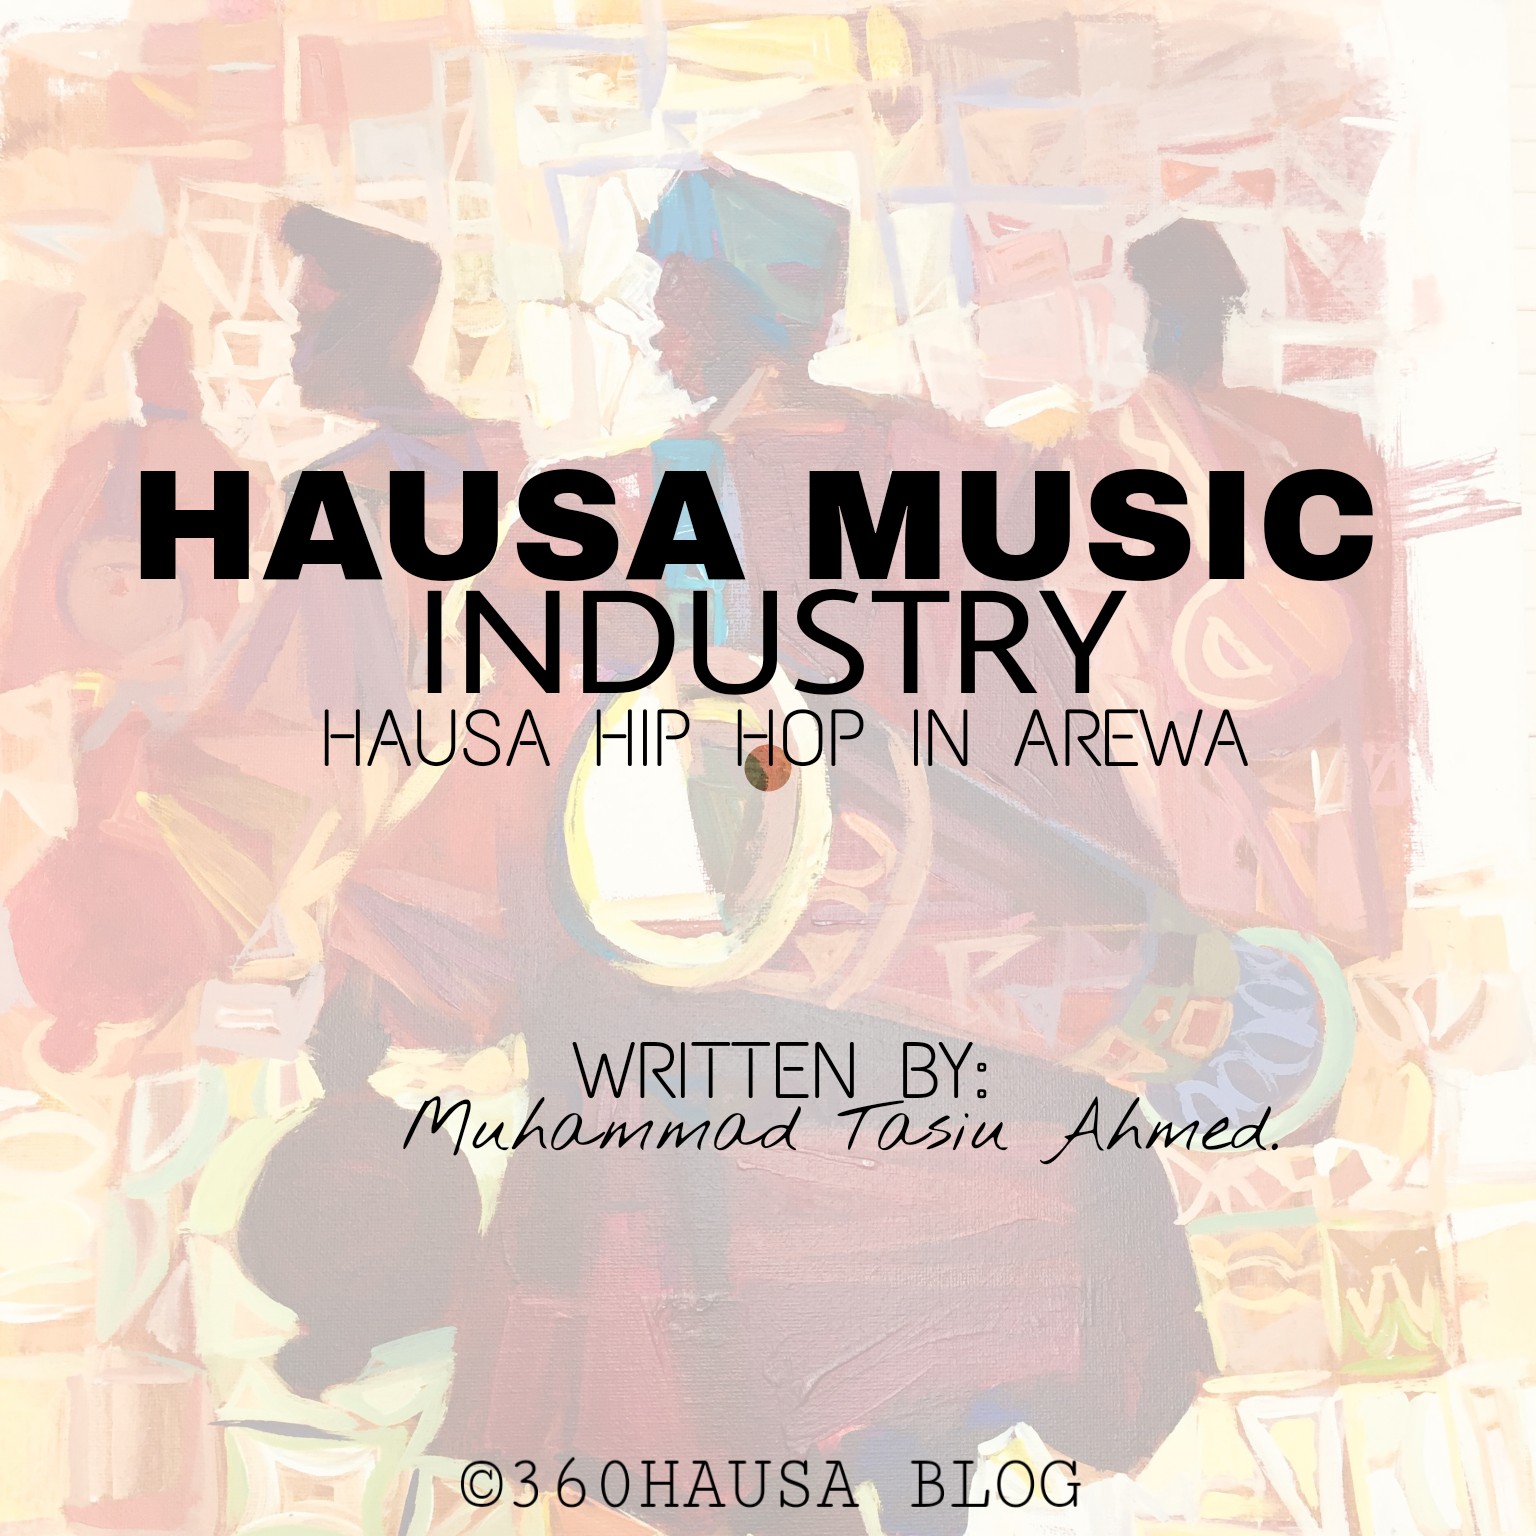 Ent. ARTICLE: Hausa Music Industry in Northern Nigeria – Hausa Hip Hop Music in Arewa